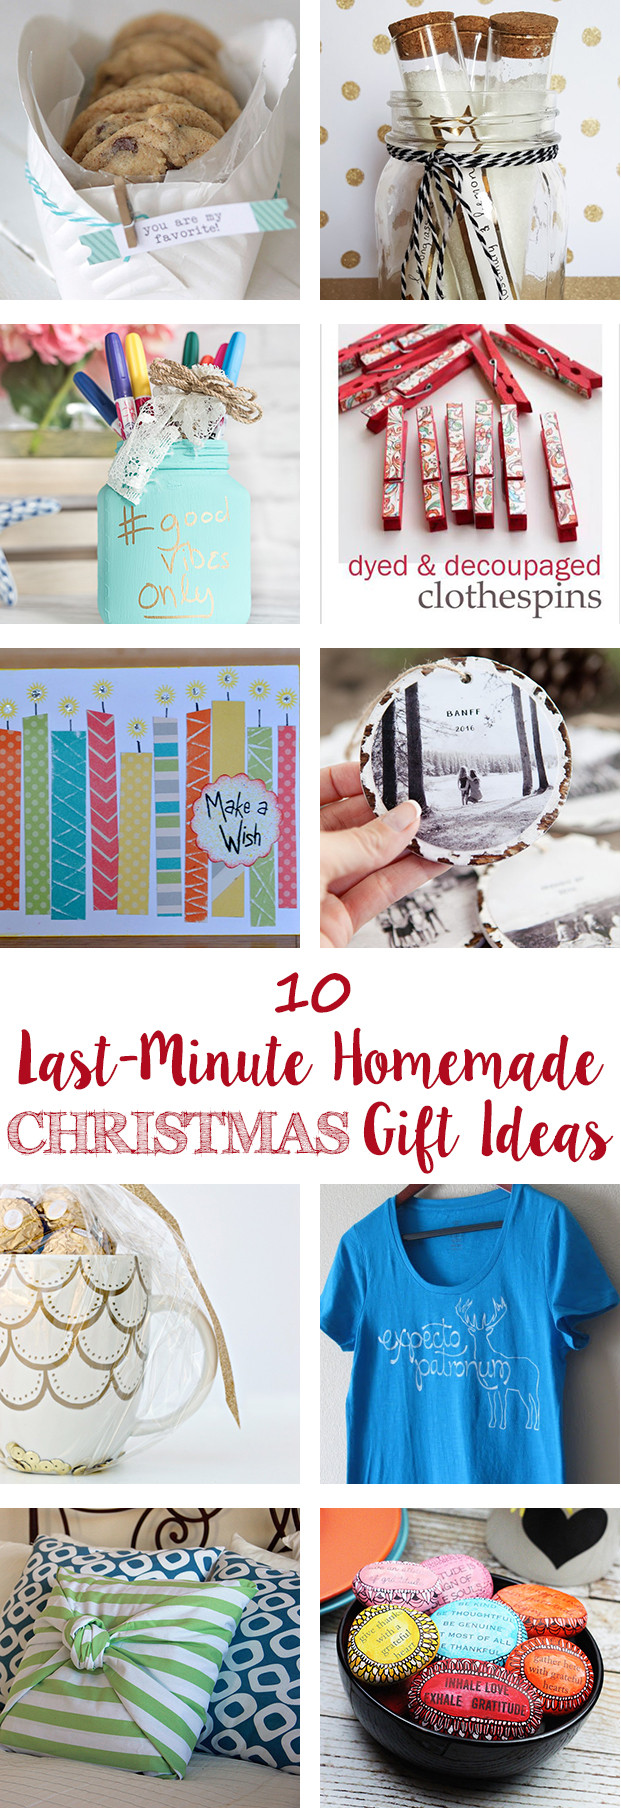 Last Minute Holiday Gift Ideas
 Last Minute Homemade Christmas Gift Ideas • Rose Clearfield